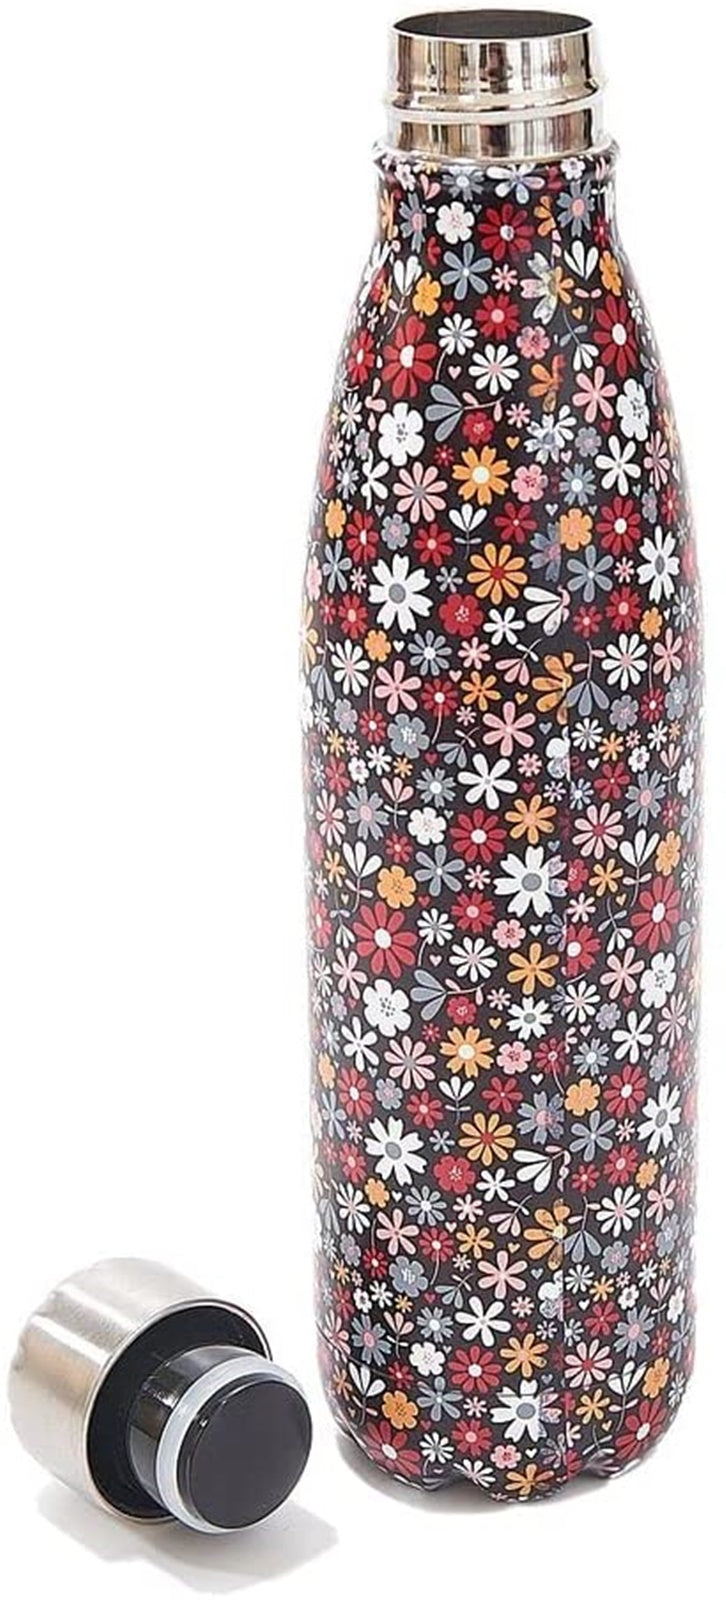 Eco Chic Reusable Thermal Bottle | Stainless Steel Insulated Travel Bottle with Leakproof Lid | Eco-Friendly and Reusable for Hot & Cold Drinks (Black Ditsy, 500ml/17oz)